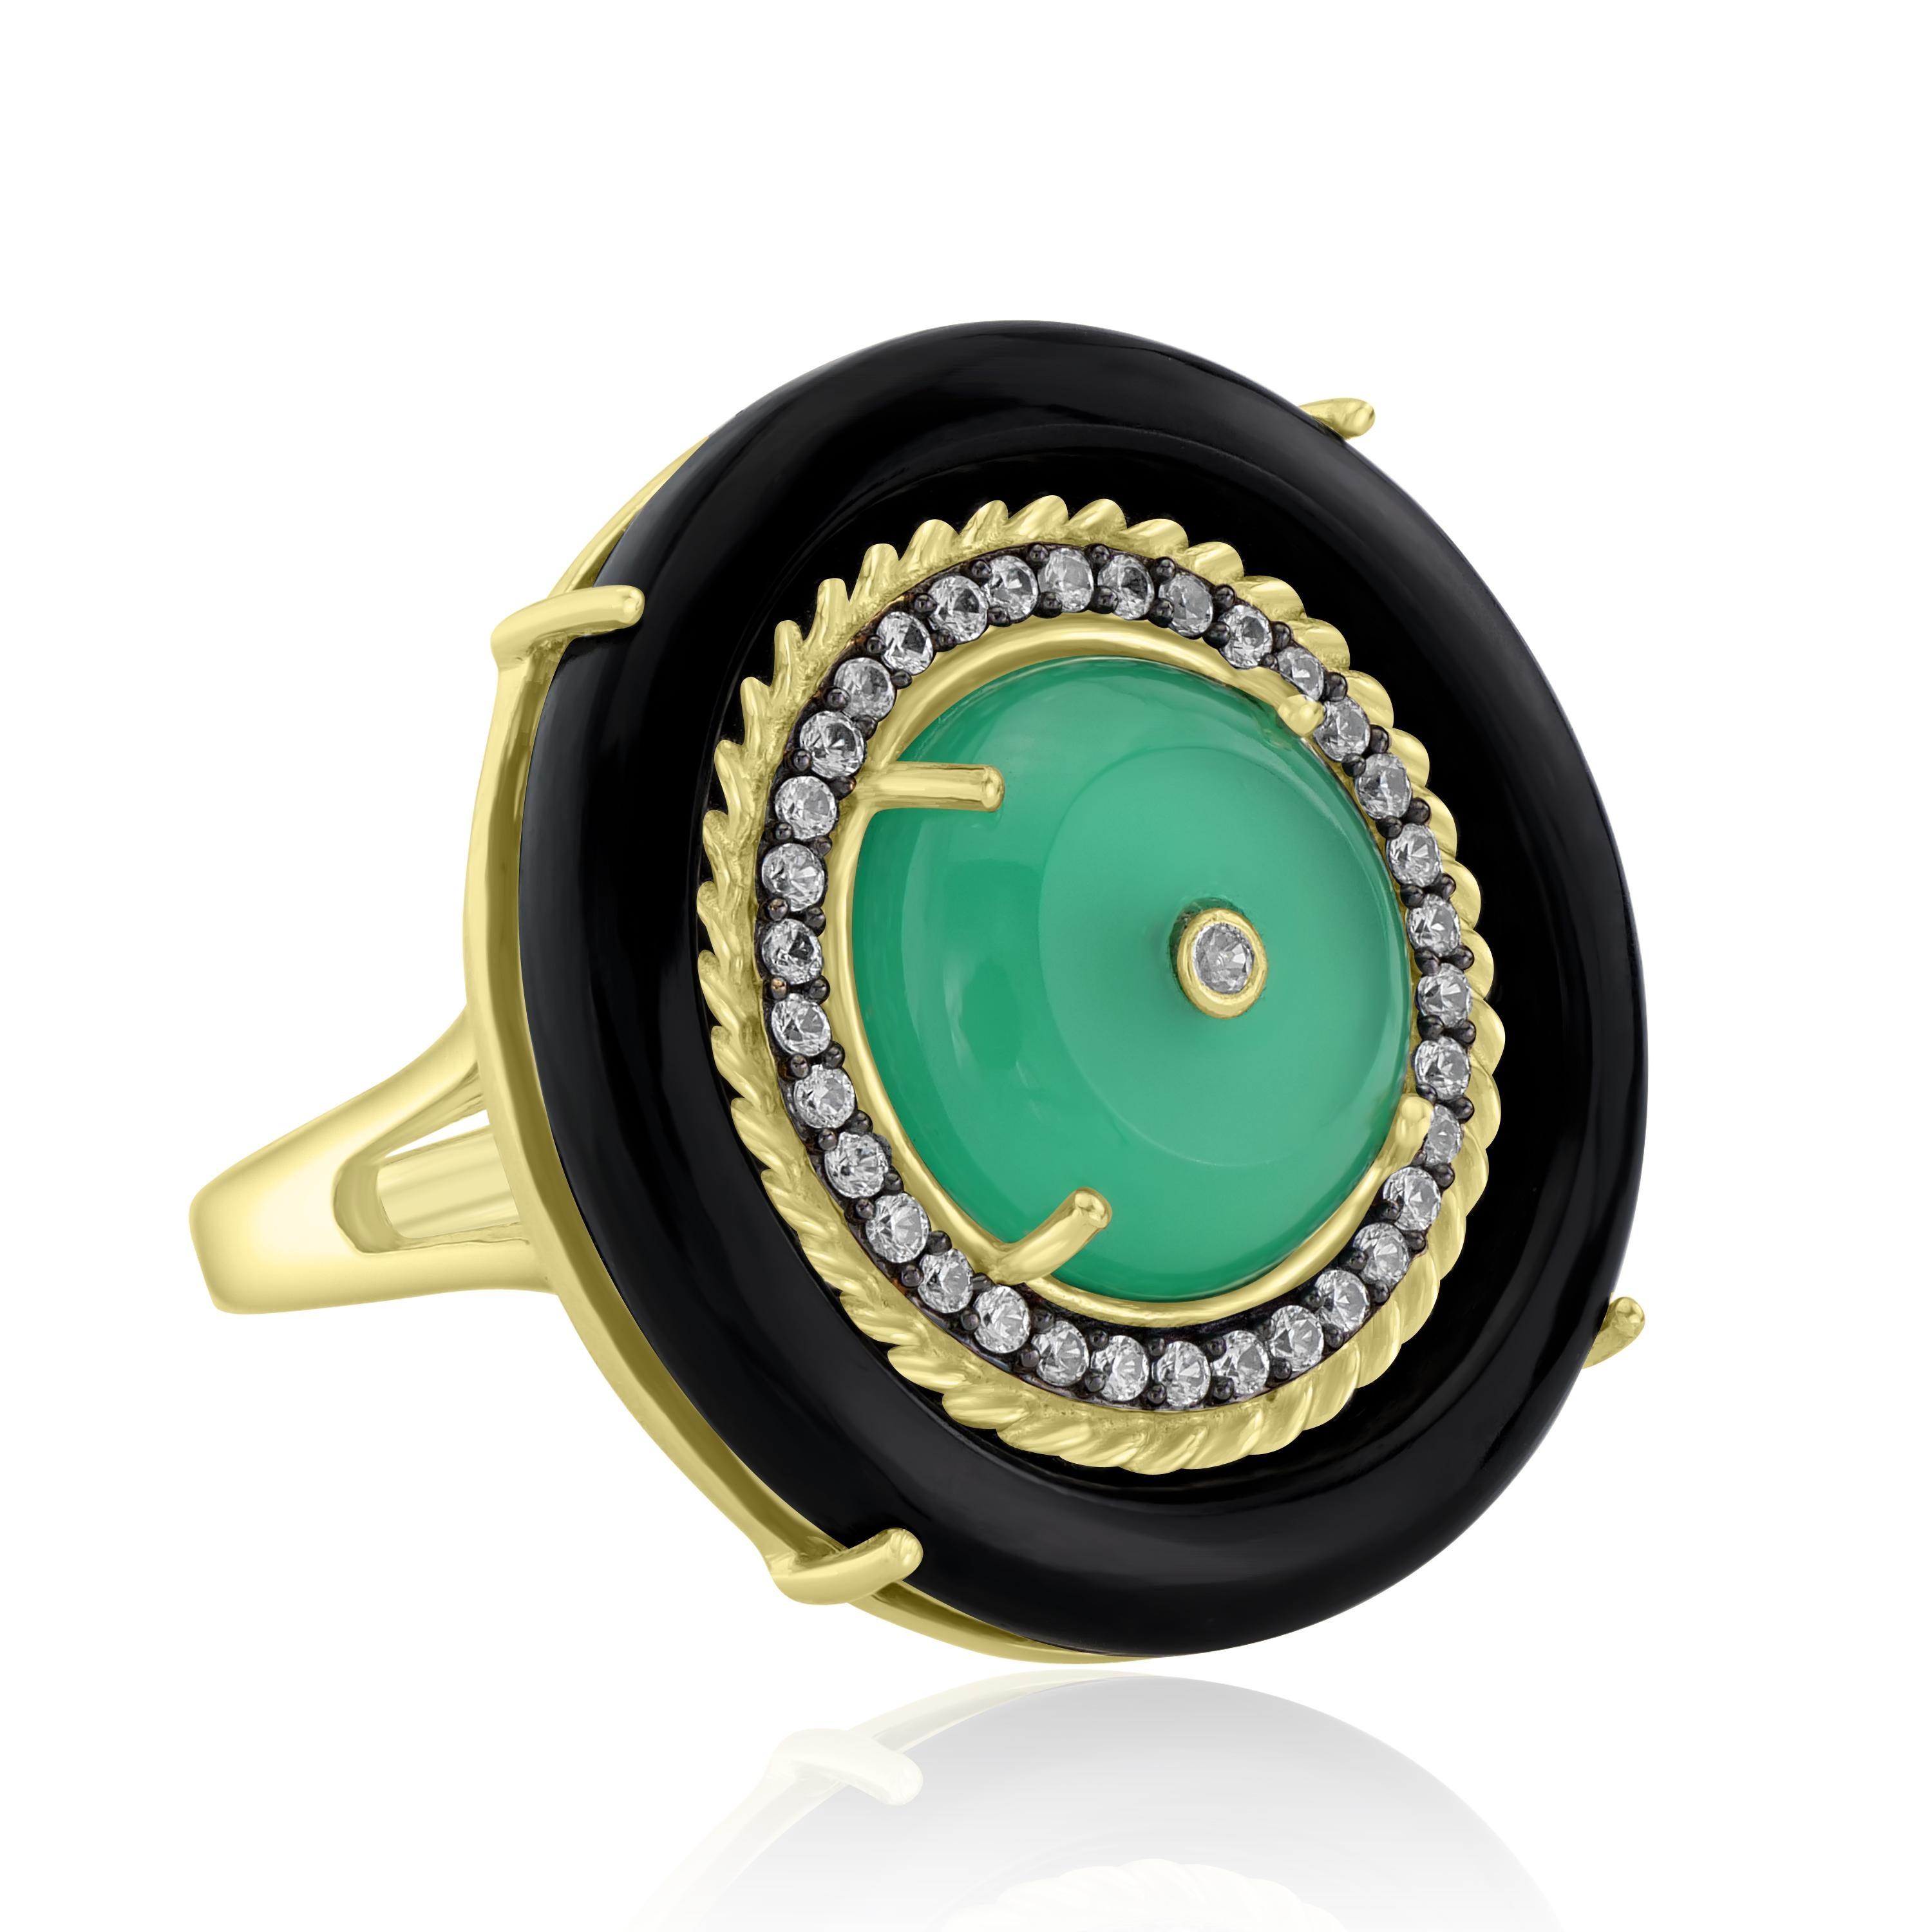 Green Onyx, Black Onyx And White Zircon Center Design Ring In 14 Karat Gold Plating Over Sterling Silver. Popular as the birthstone for the month of July, onyx is also known to be the protector from evil. This 14 Kt yellow gold plating over 925